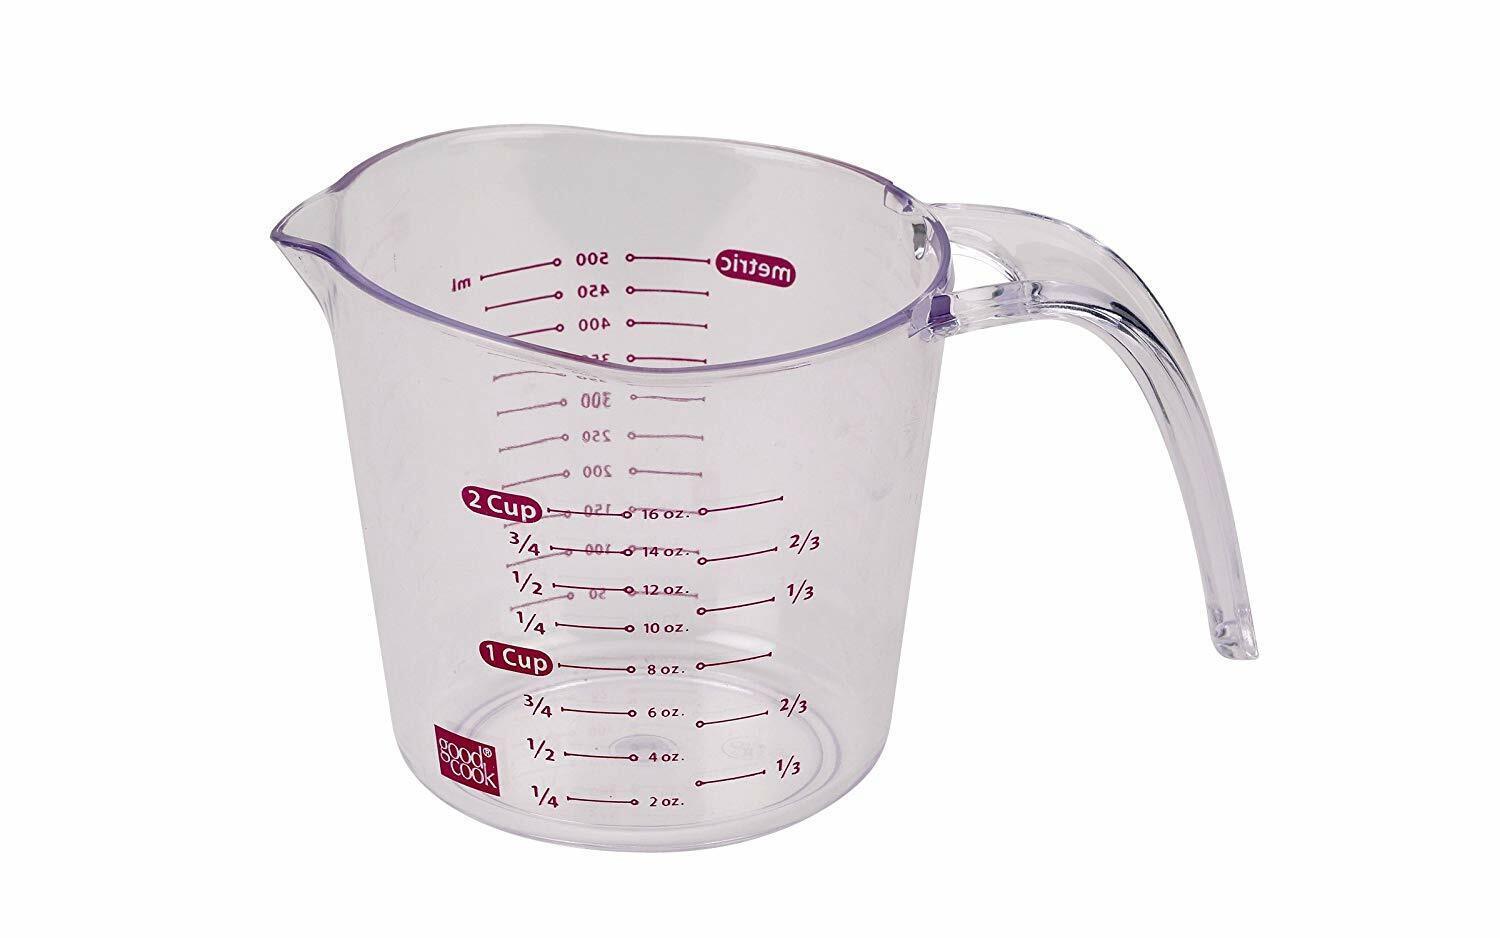 CHOICE Pampered Chef Sliding Adjustable Measuring Cup Scoop Tool